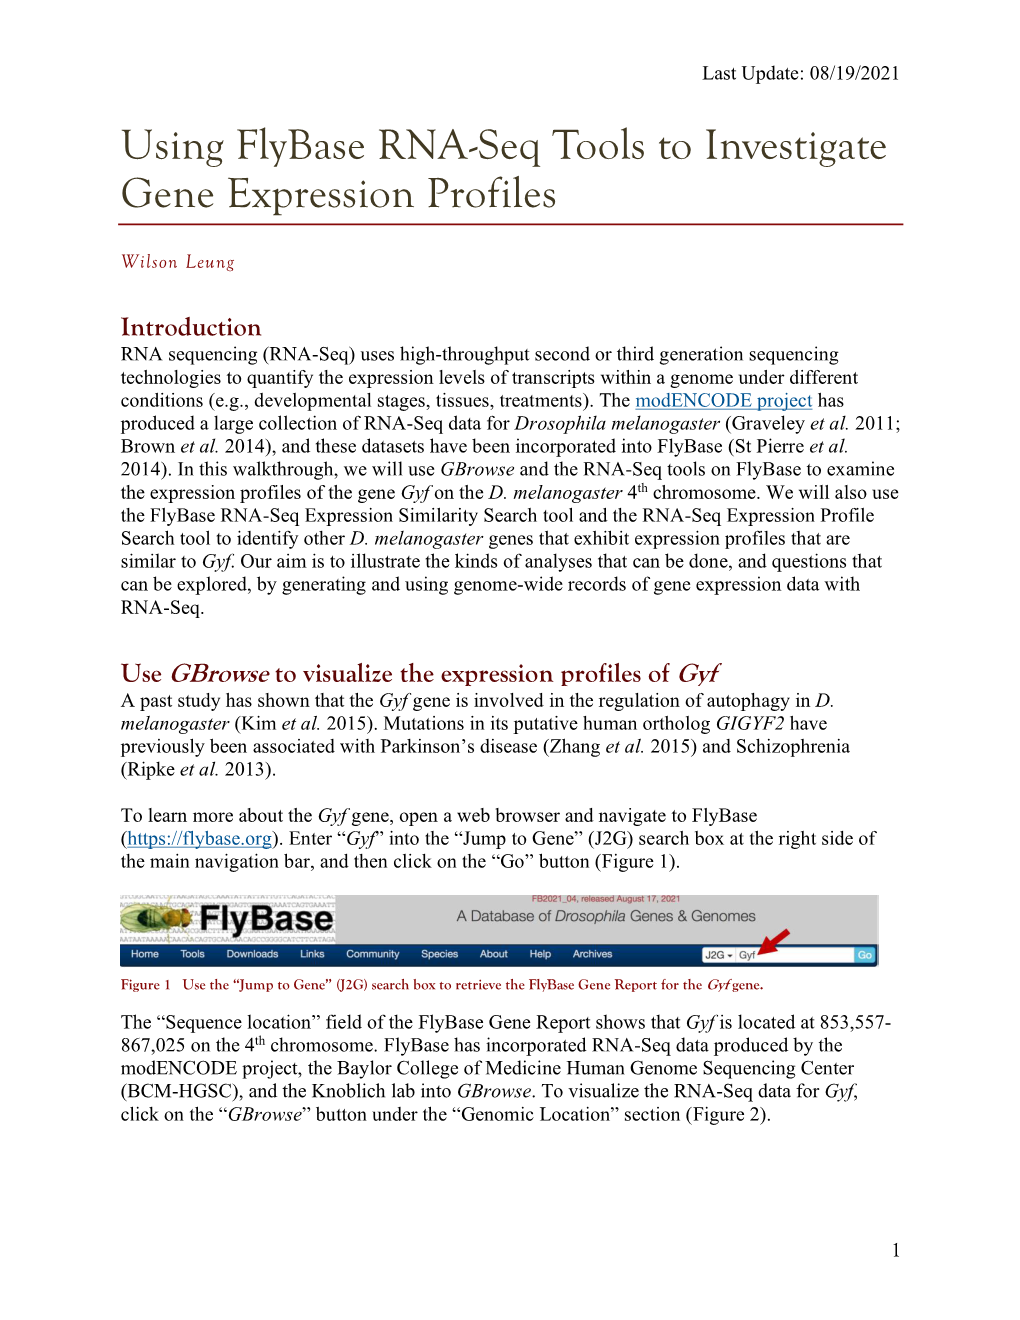 Using Flybase RNA-Seq Tools to Investigate Gene Expression Profiles